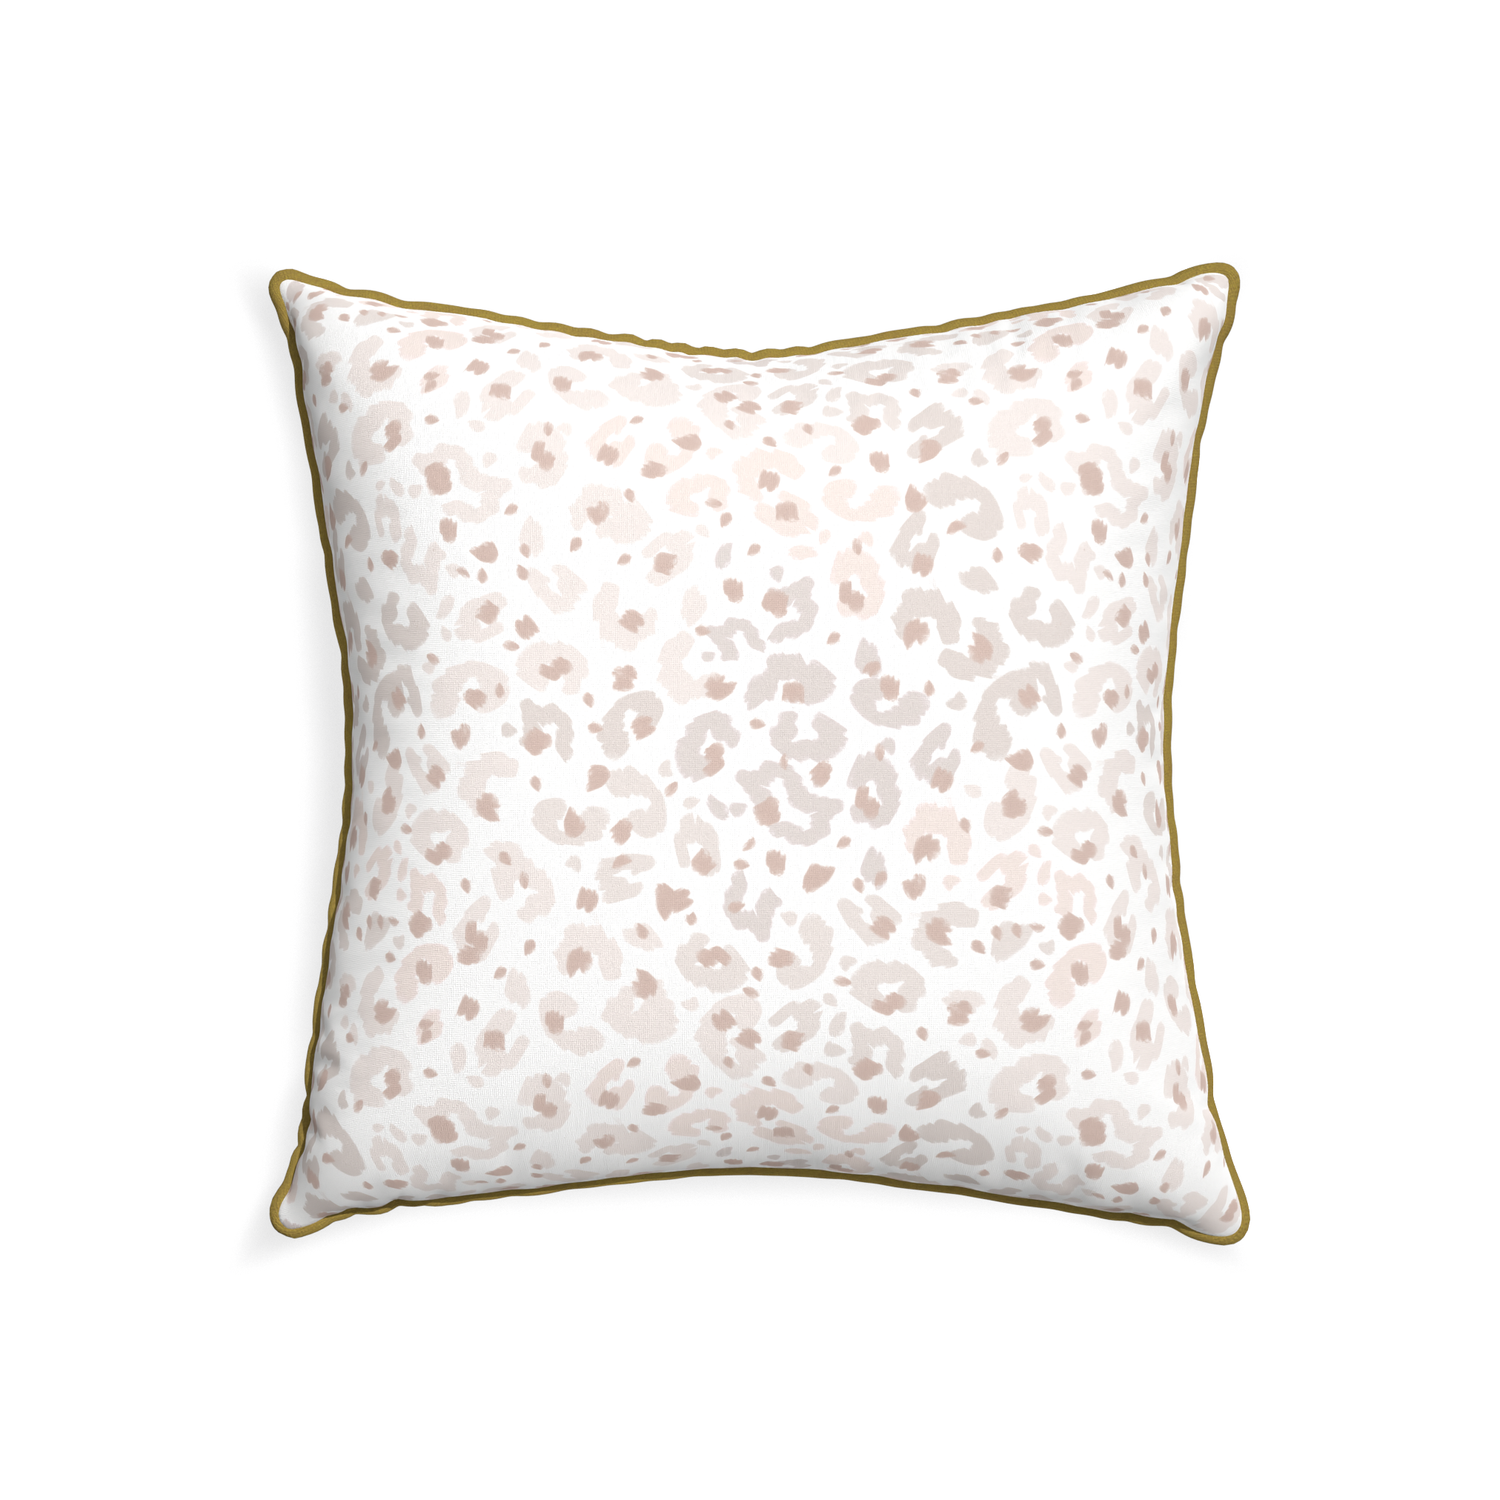 22-square rosie custom beige animal printpillow with c piping on white background